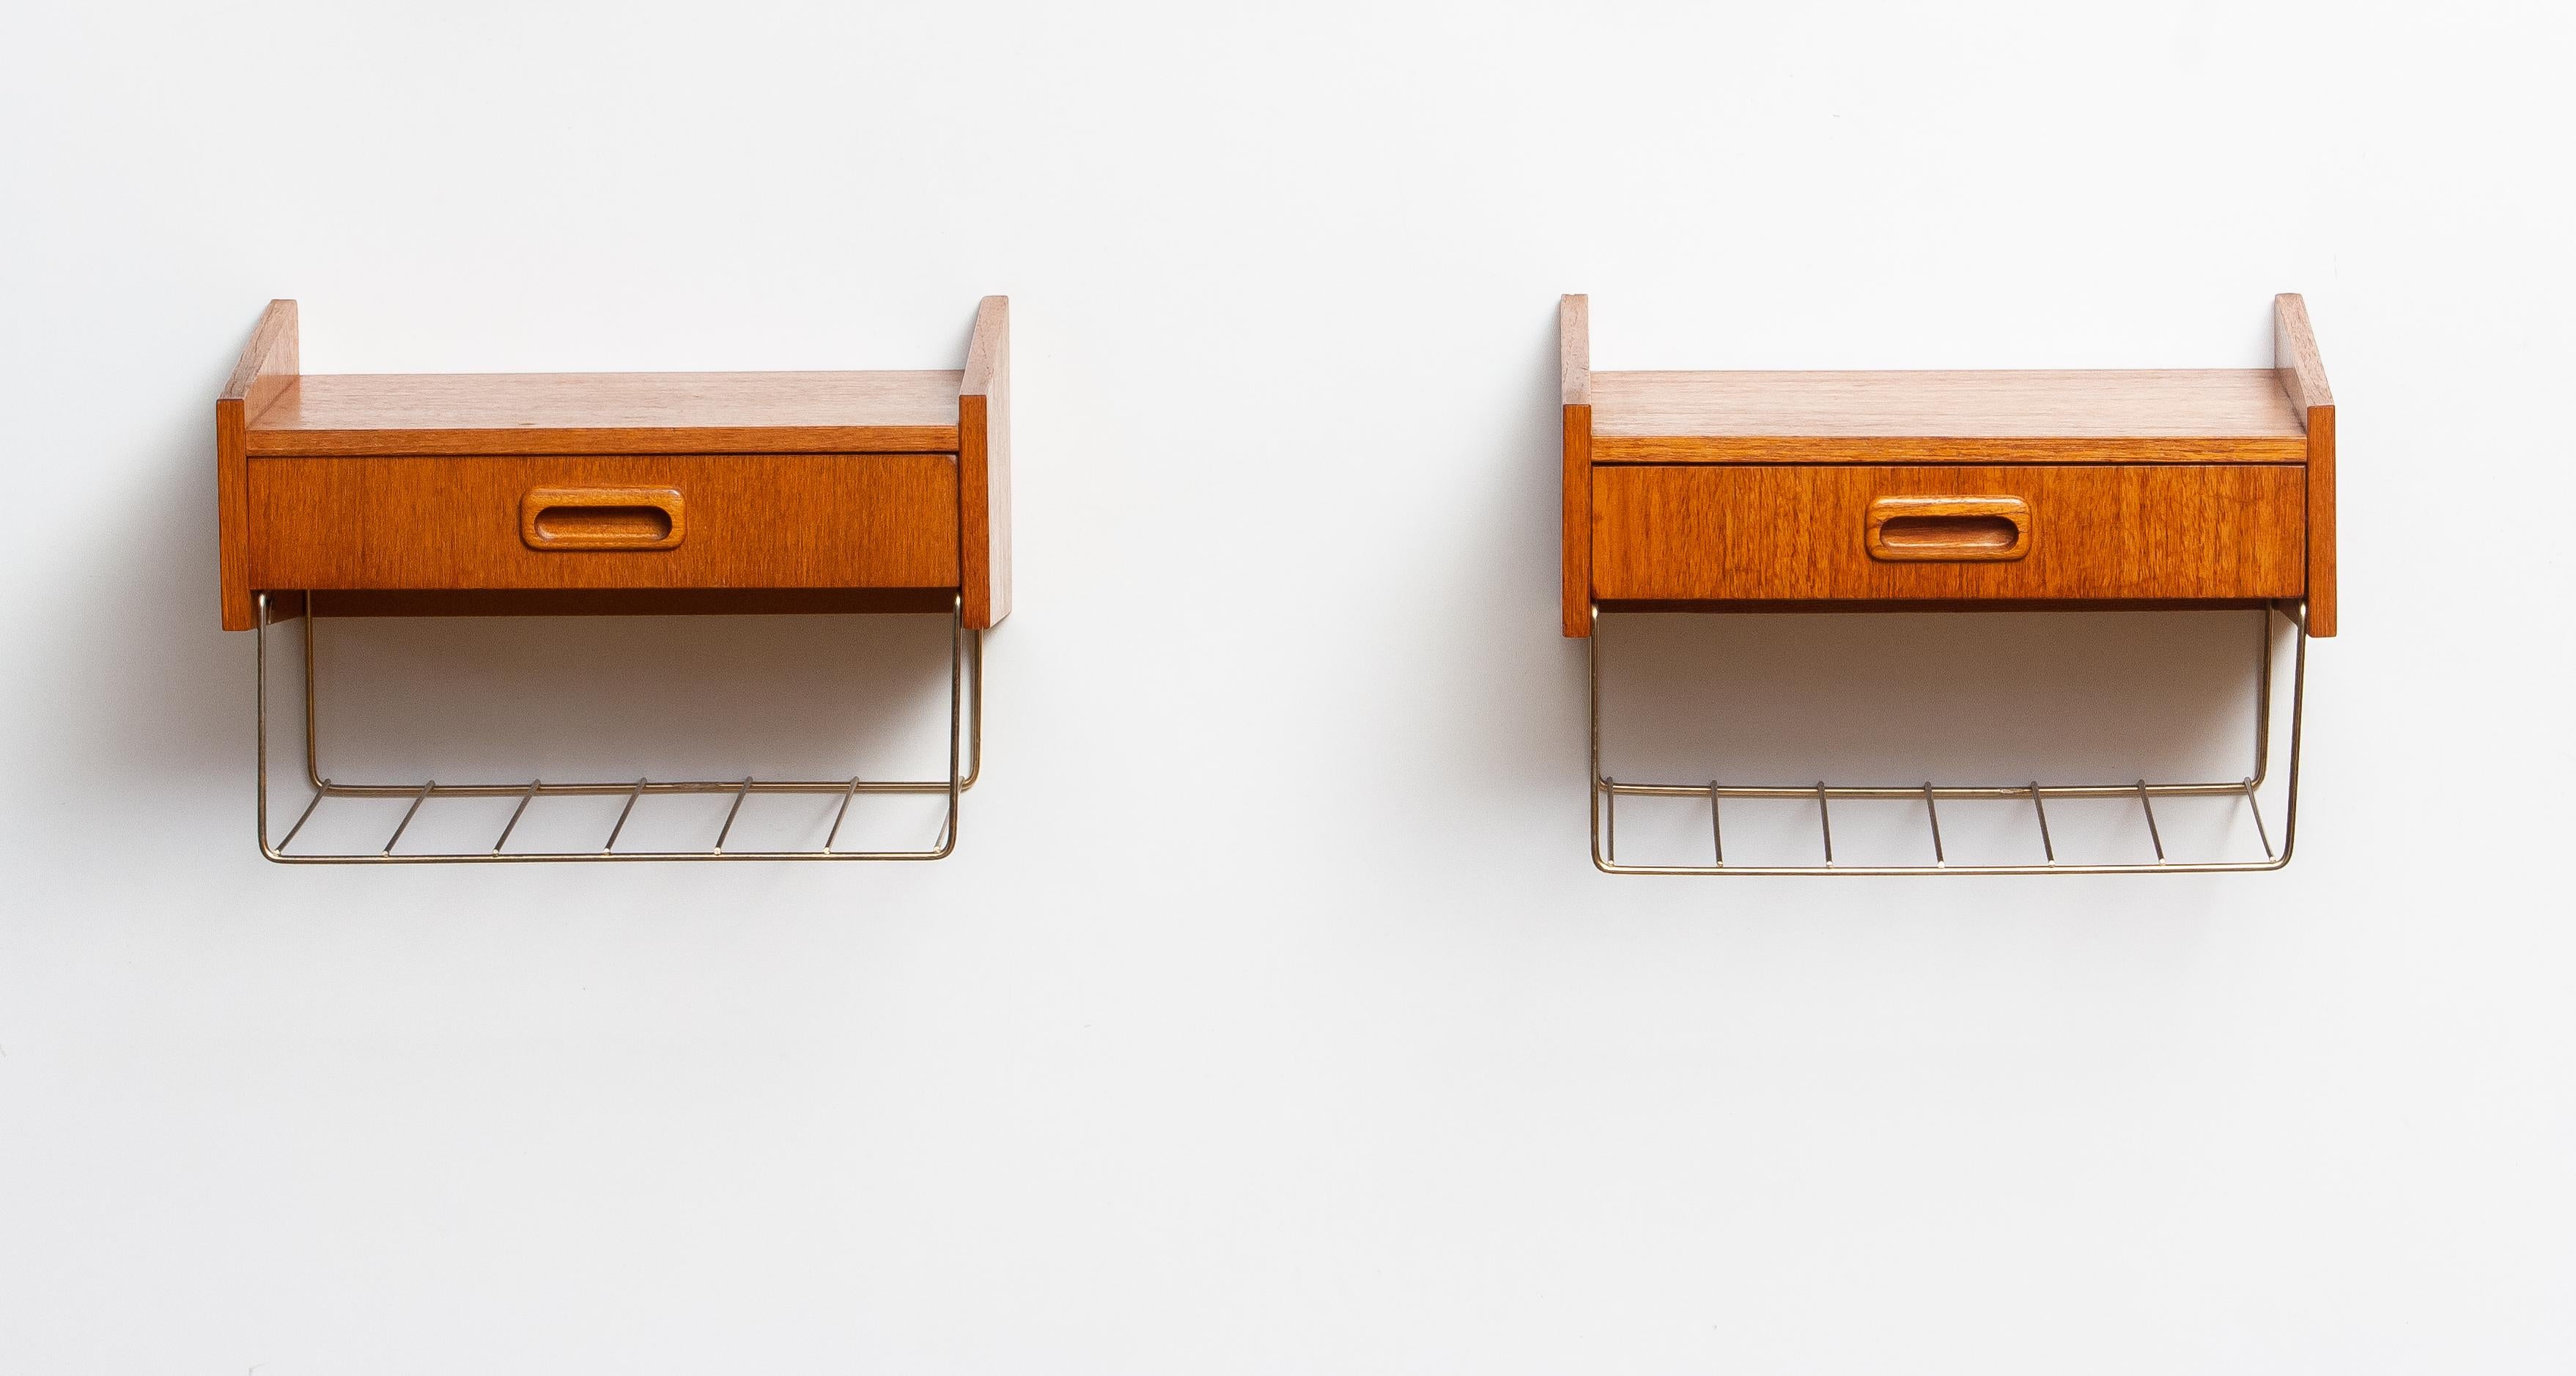 Beautiful pair wall mounted bedside tables / night stands in teak with one drawer each and a brass magazine rack attributed to Carlström & Co. Möbelfabrik in Sweden
Both are in very good condition.
Easily to mount on the wall with two hooks or